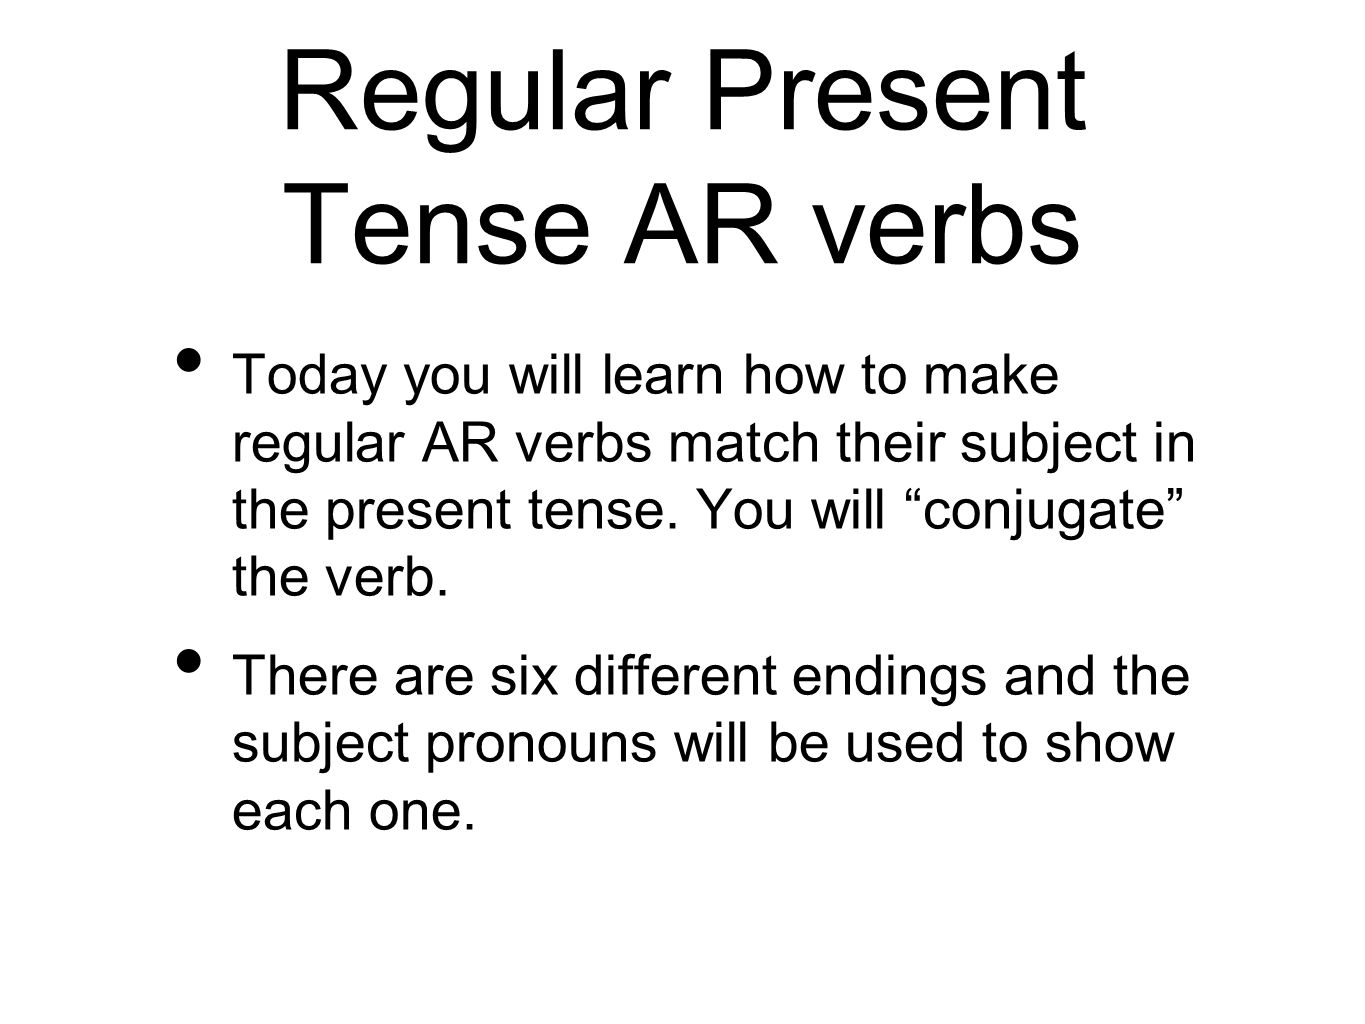 Regular Present Tense AR verbs Today you will learn how to make regular AR verbs match their subject in the present tense.